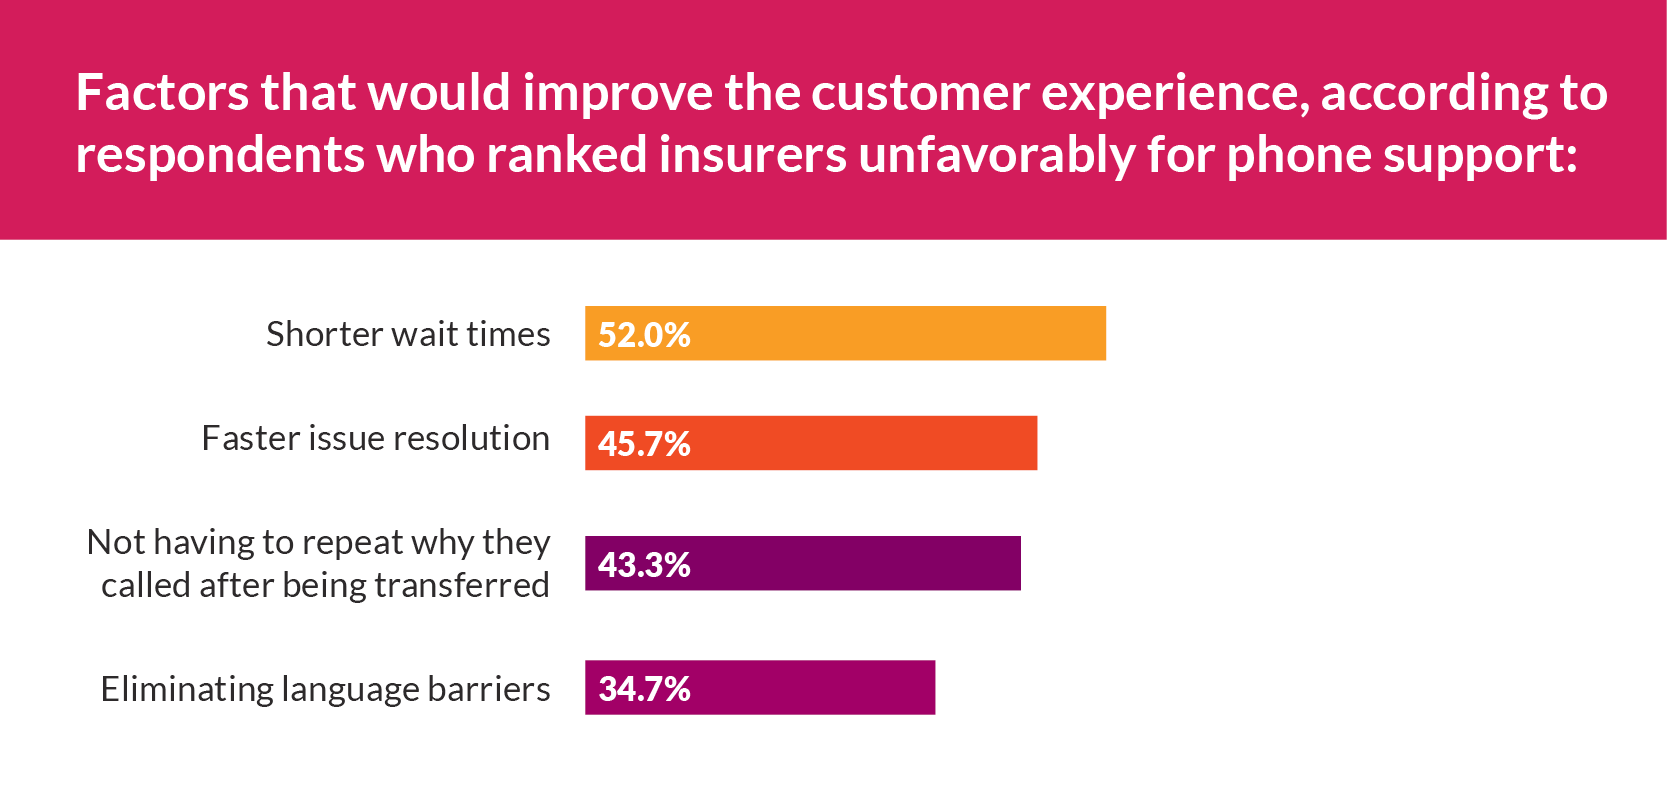 factors that would improve the customer experience, according to respondents who ranked insurers unfavorably for phone support shorter wait times 52% faster issue resolution 46% hot having to repeat why they called after being transferred 43% eliminating language barriers 35%